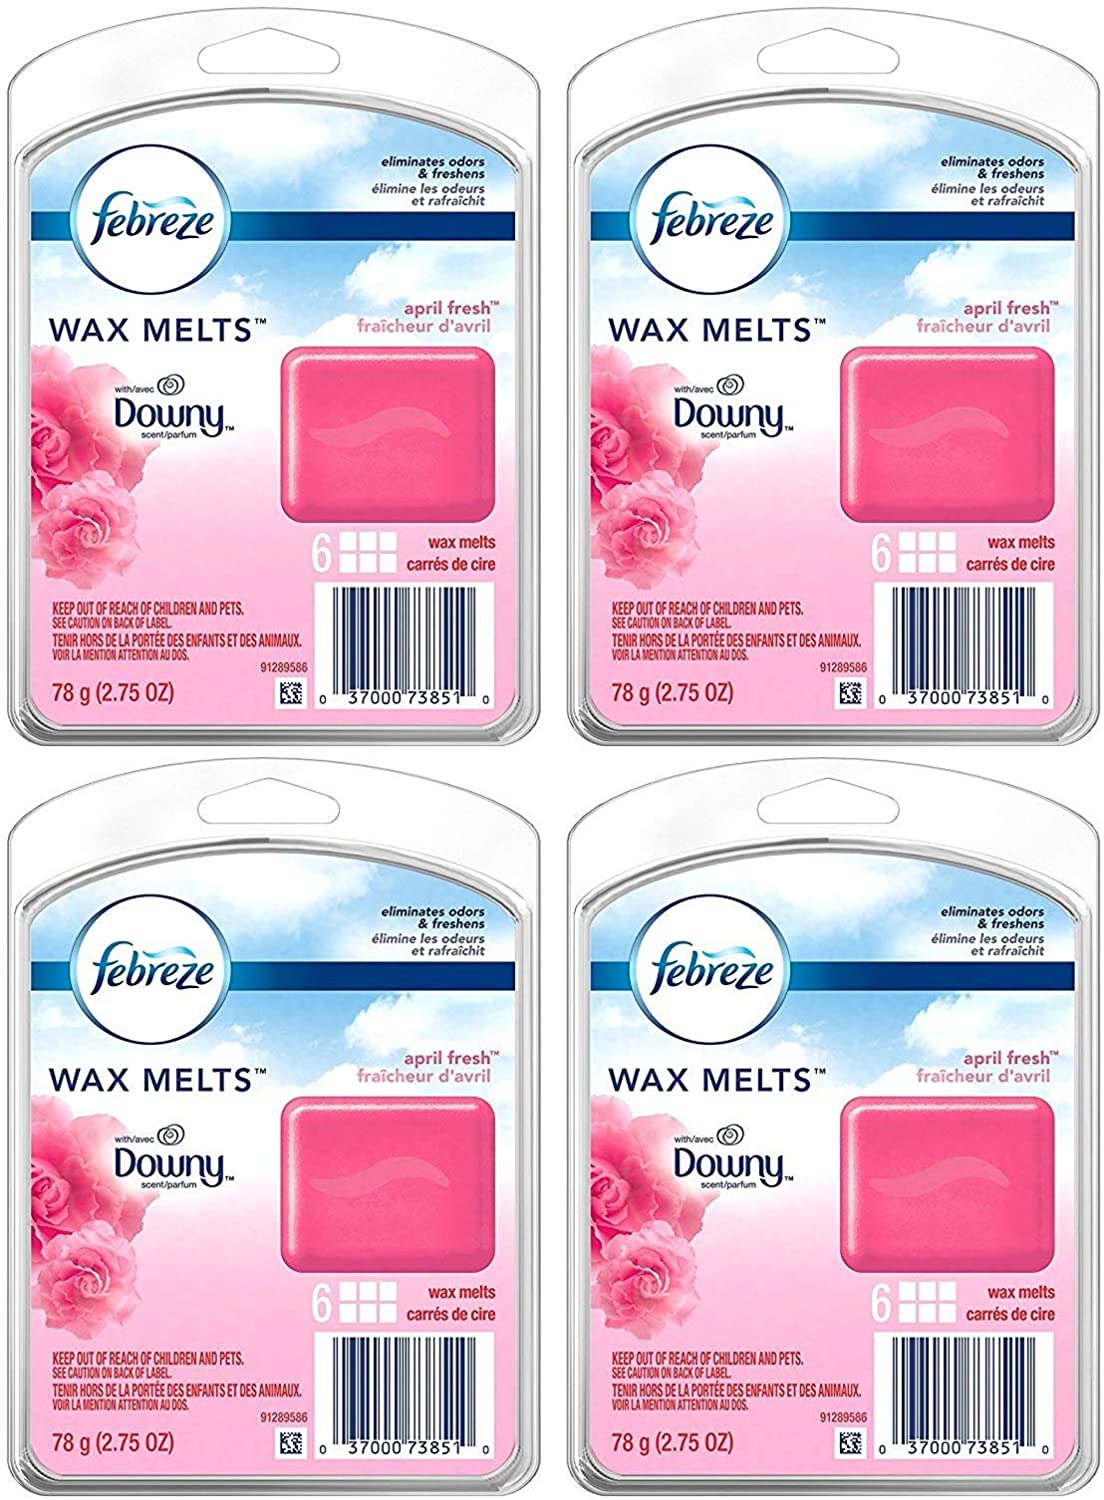 Wax Melts Air Freshener - with Downy April Fresh Scent - Net Wt. 2.75 oz (78 g) per Package - Pack of 4 Packages